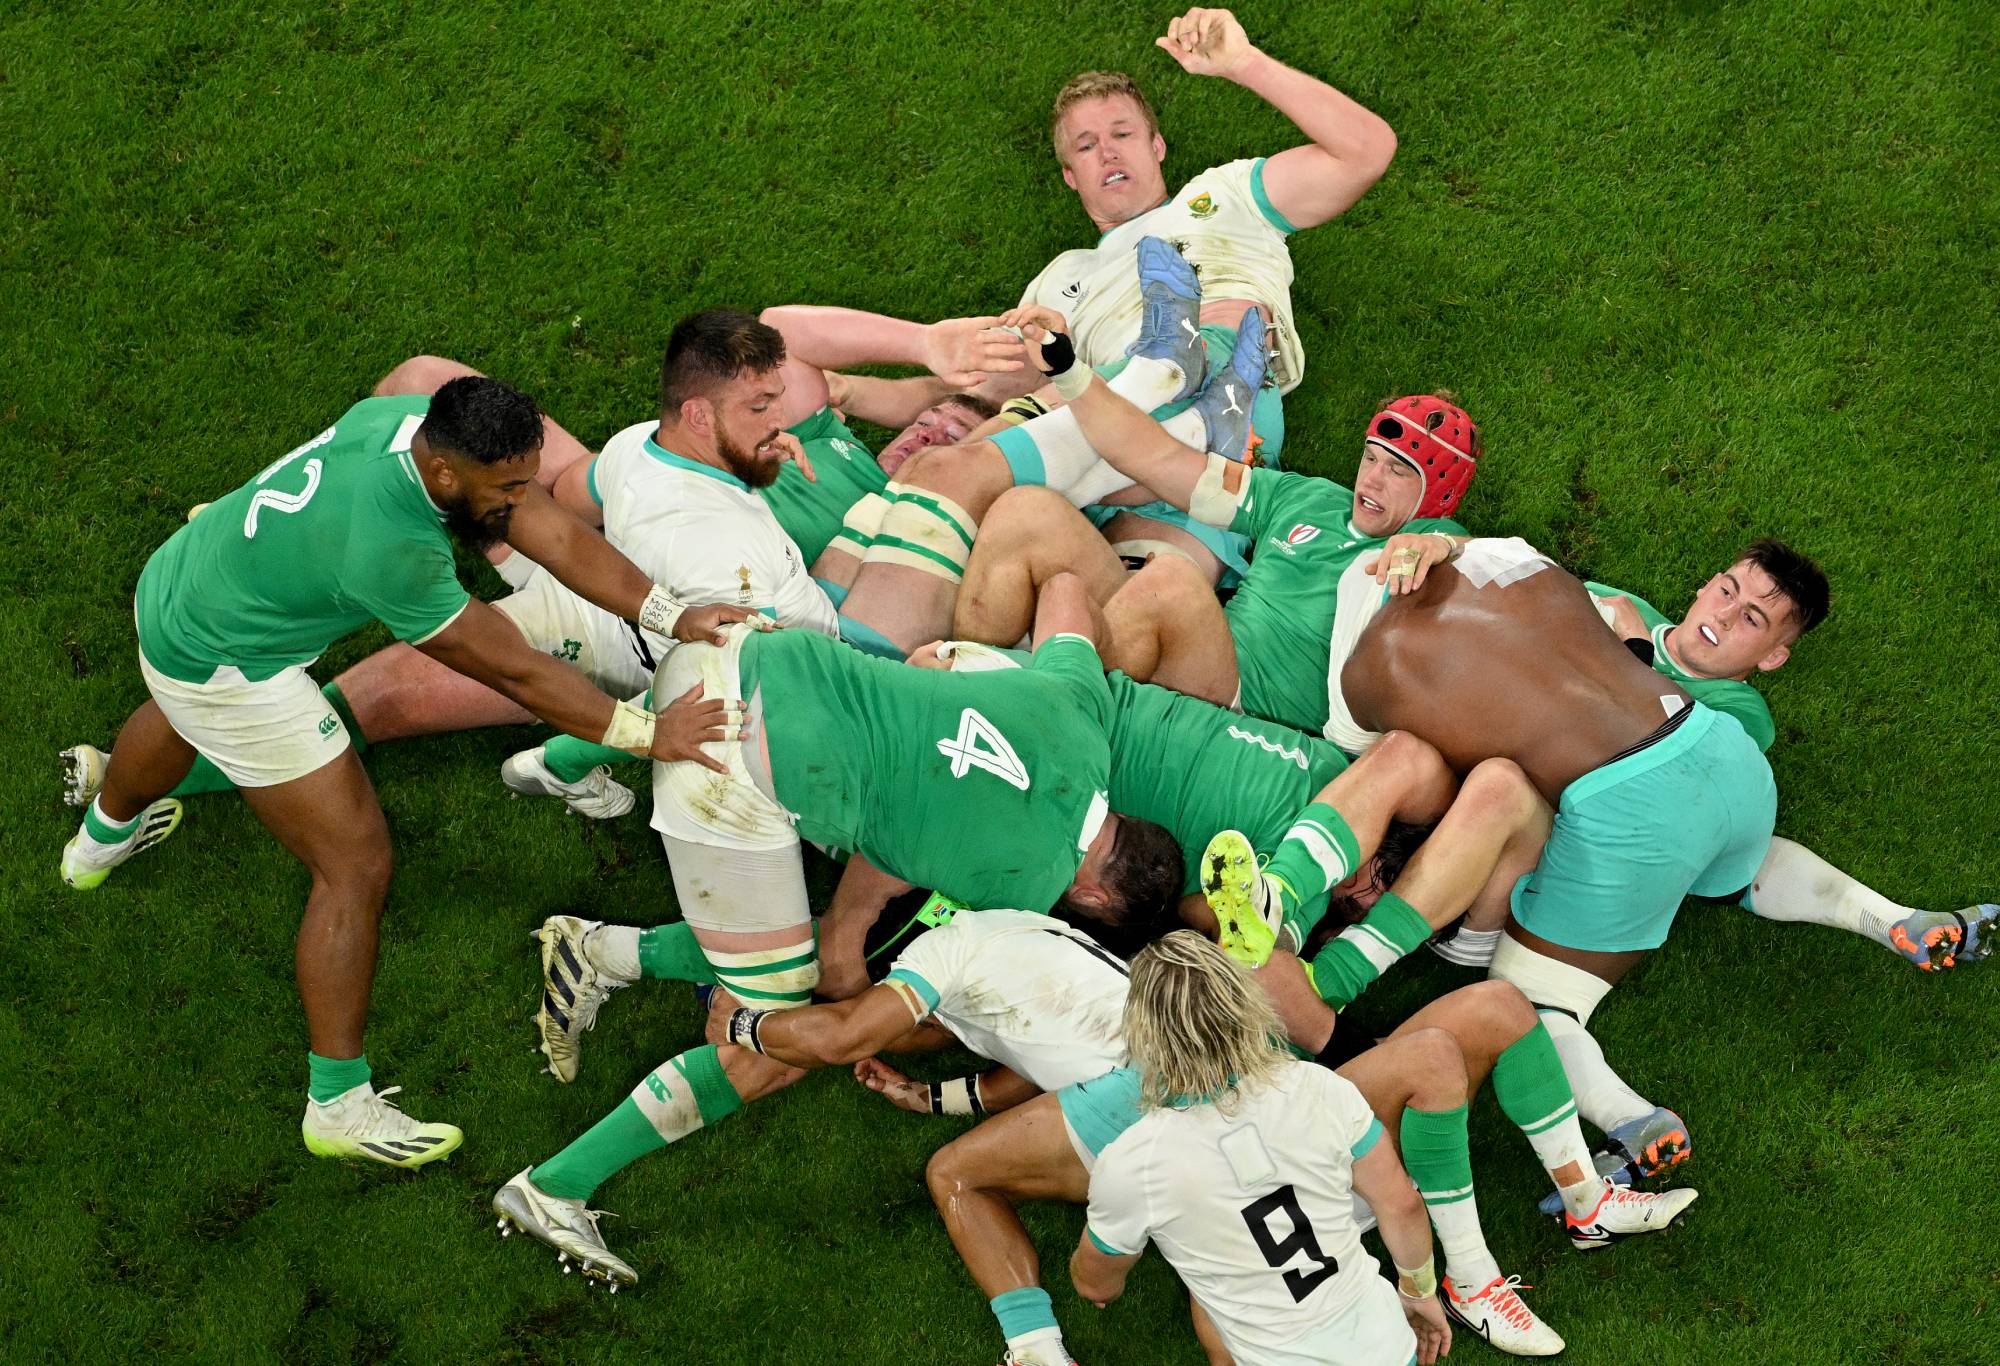 Tadhg Beirne Of Ireland Recovers The Ball From The Base Of The Ruck During The Rugby World Cup France 2023 Match Between South Africa And Ireland At Stade De France On September 23, 2023 In Paris, France. (Photo By Matthias Hangst/Getty Images)